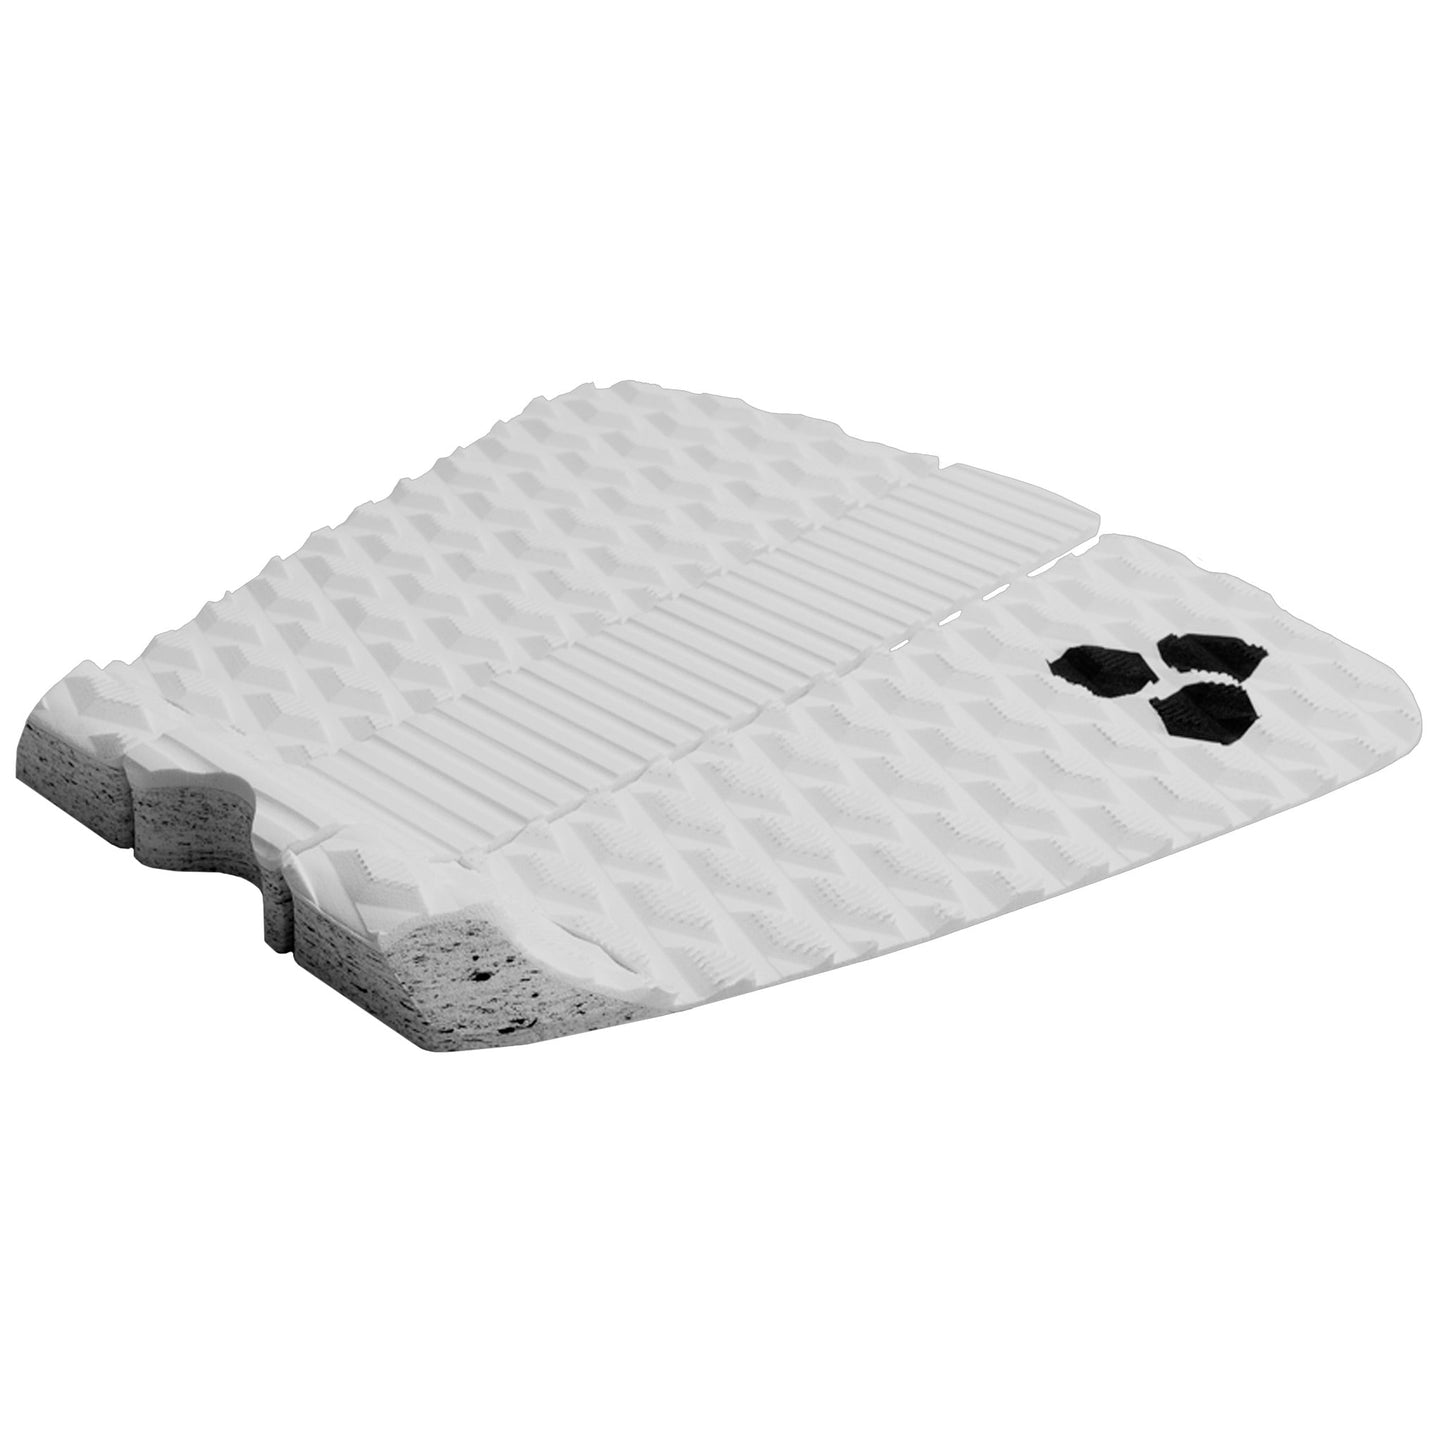 MICHAEL FEBRUARY TRACTION PAD